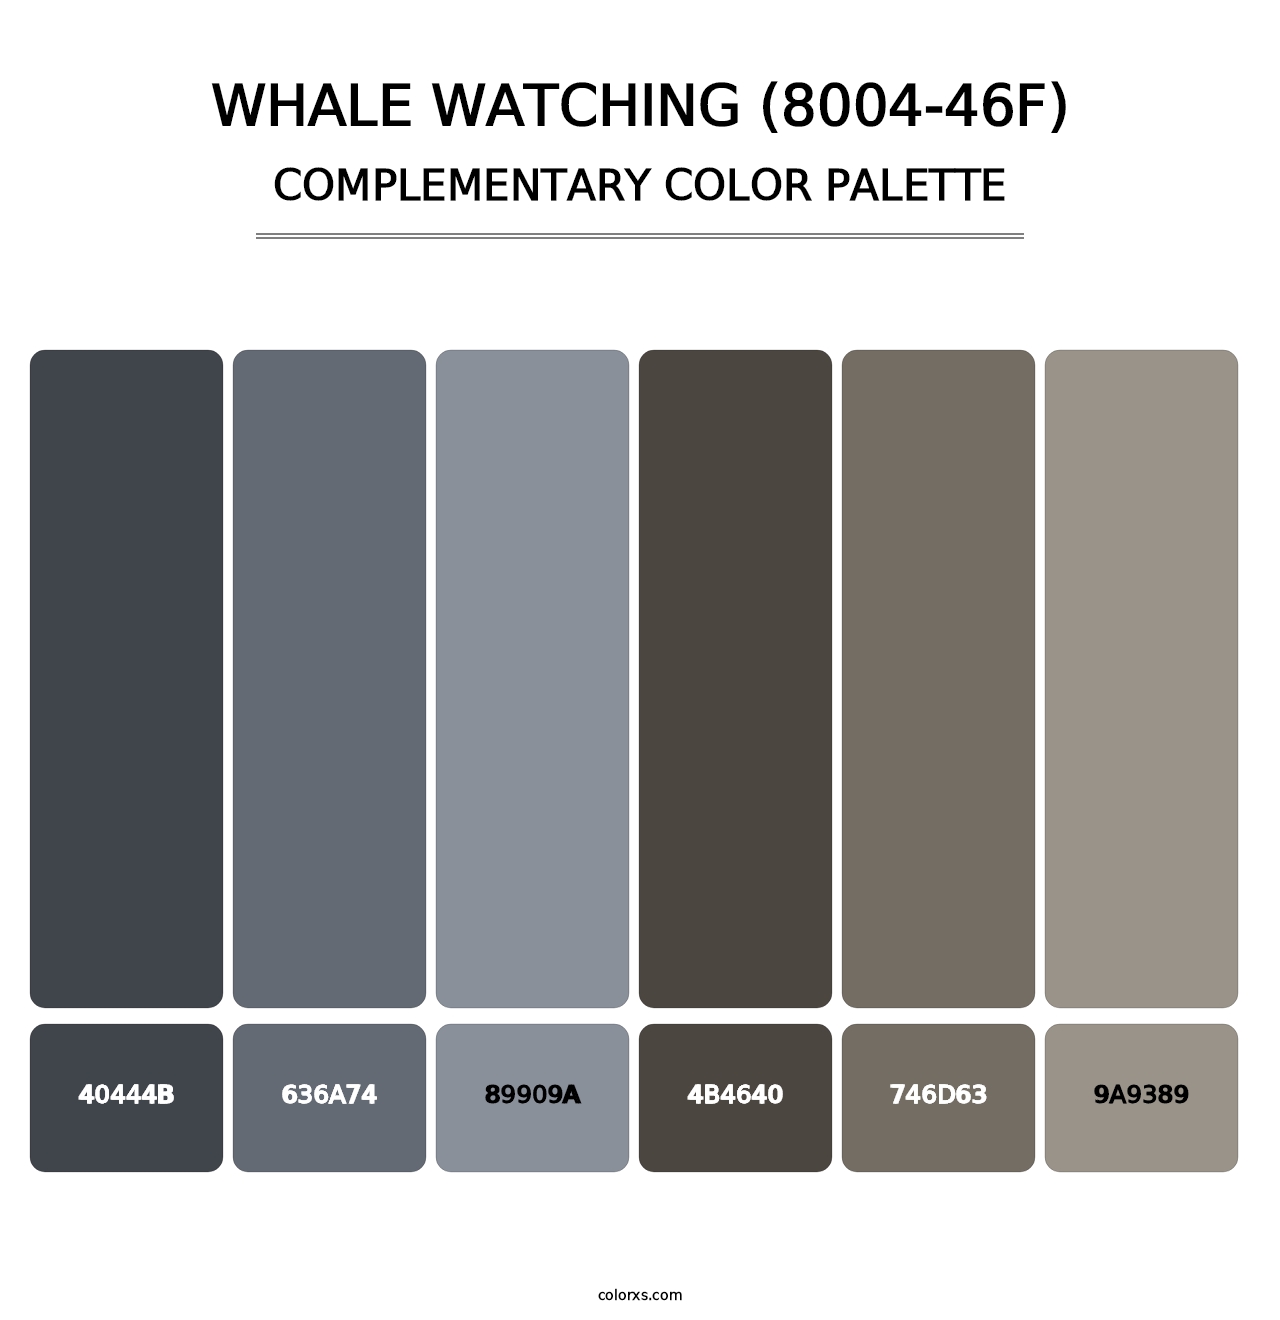 Whale Watching (8004-46F) - Complementary Color Palette